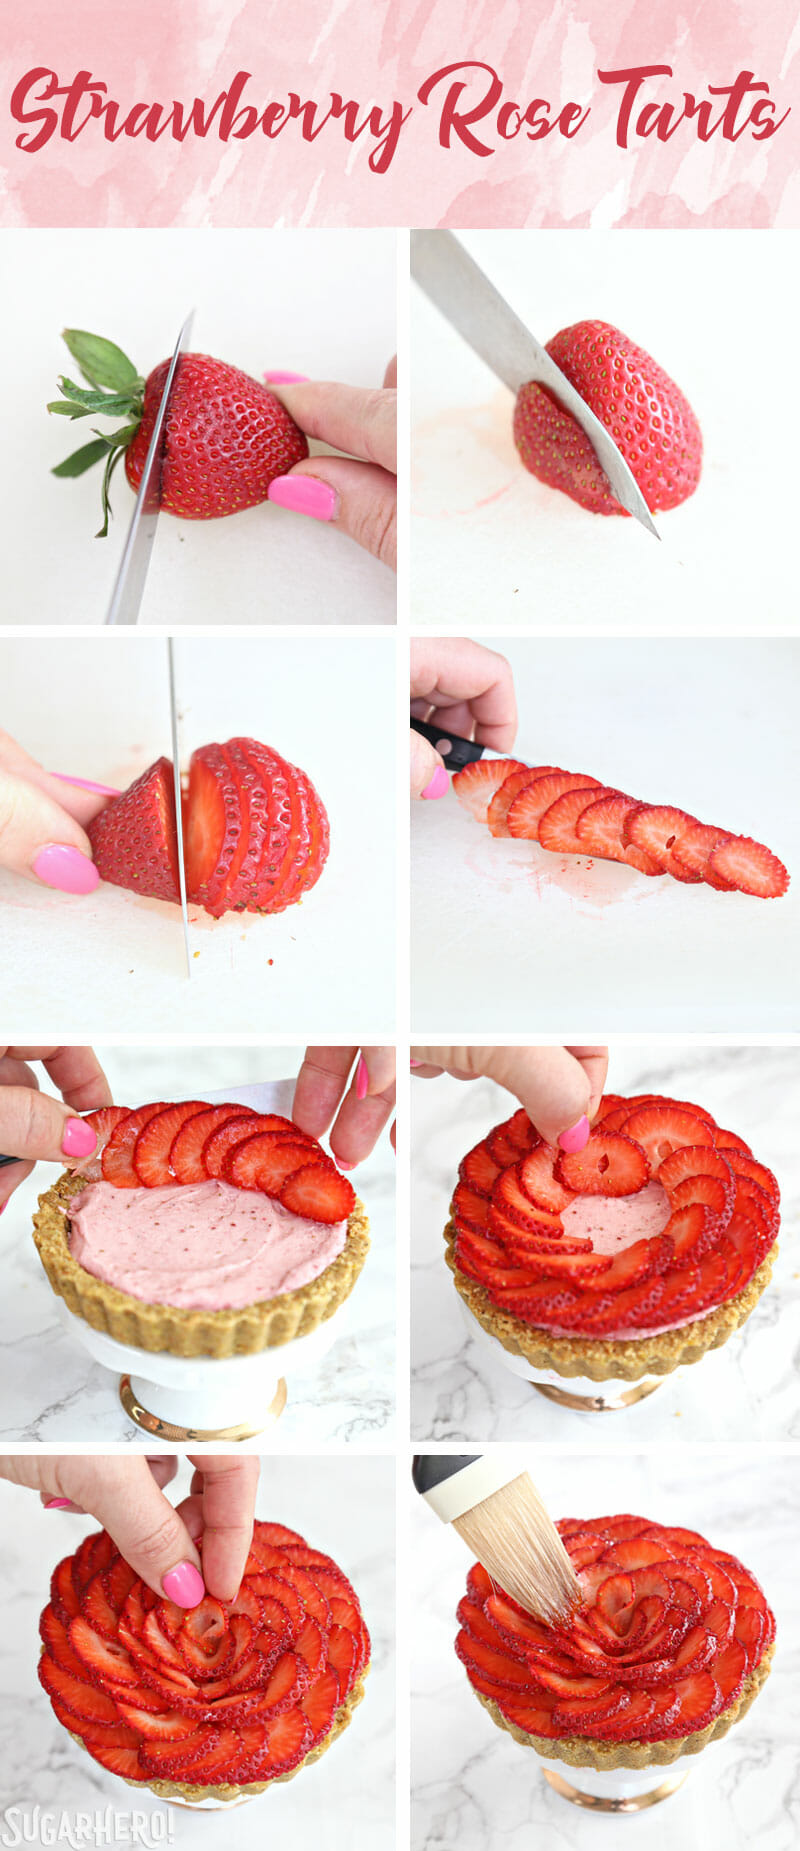 Strawberry Rose Tarts - picture tutorial showing how to assemble the strawberries on top of a strawberry rose tart | From SugarHero.com